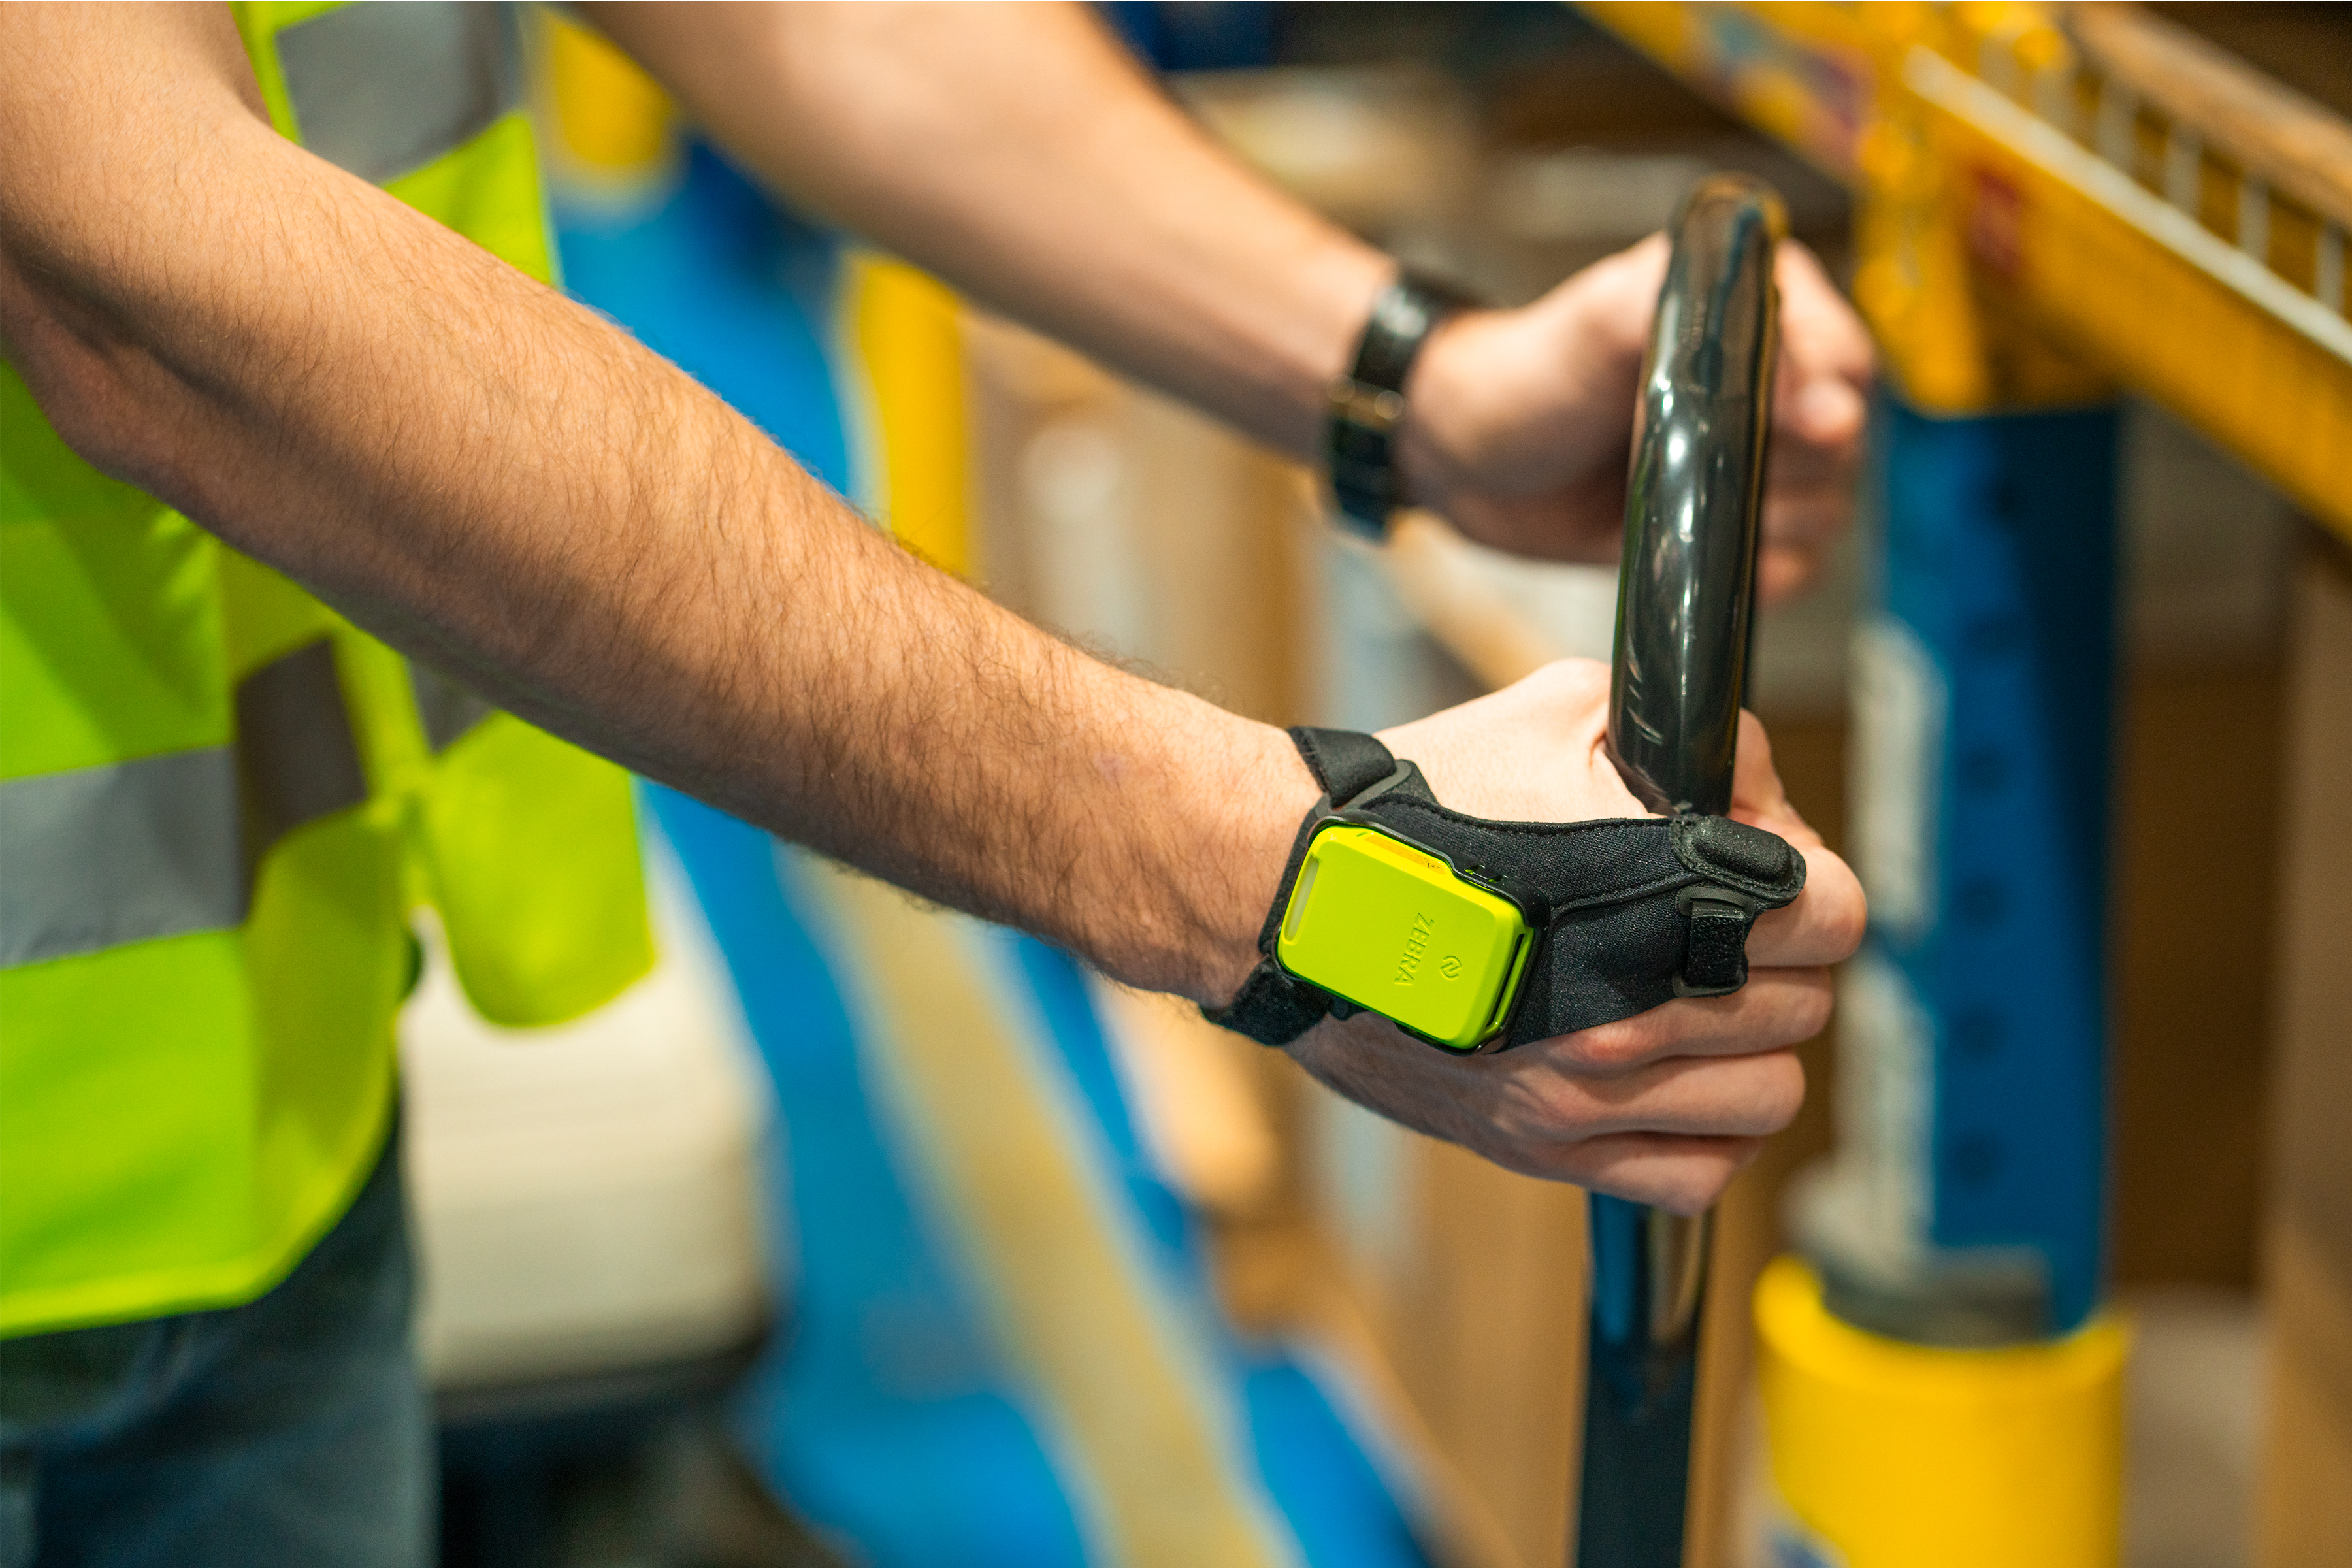 A worker with a wearable computer on their hand moves items in a warehouse